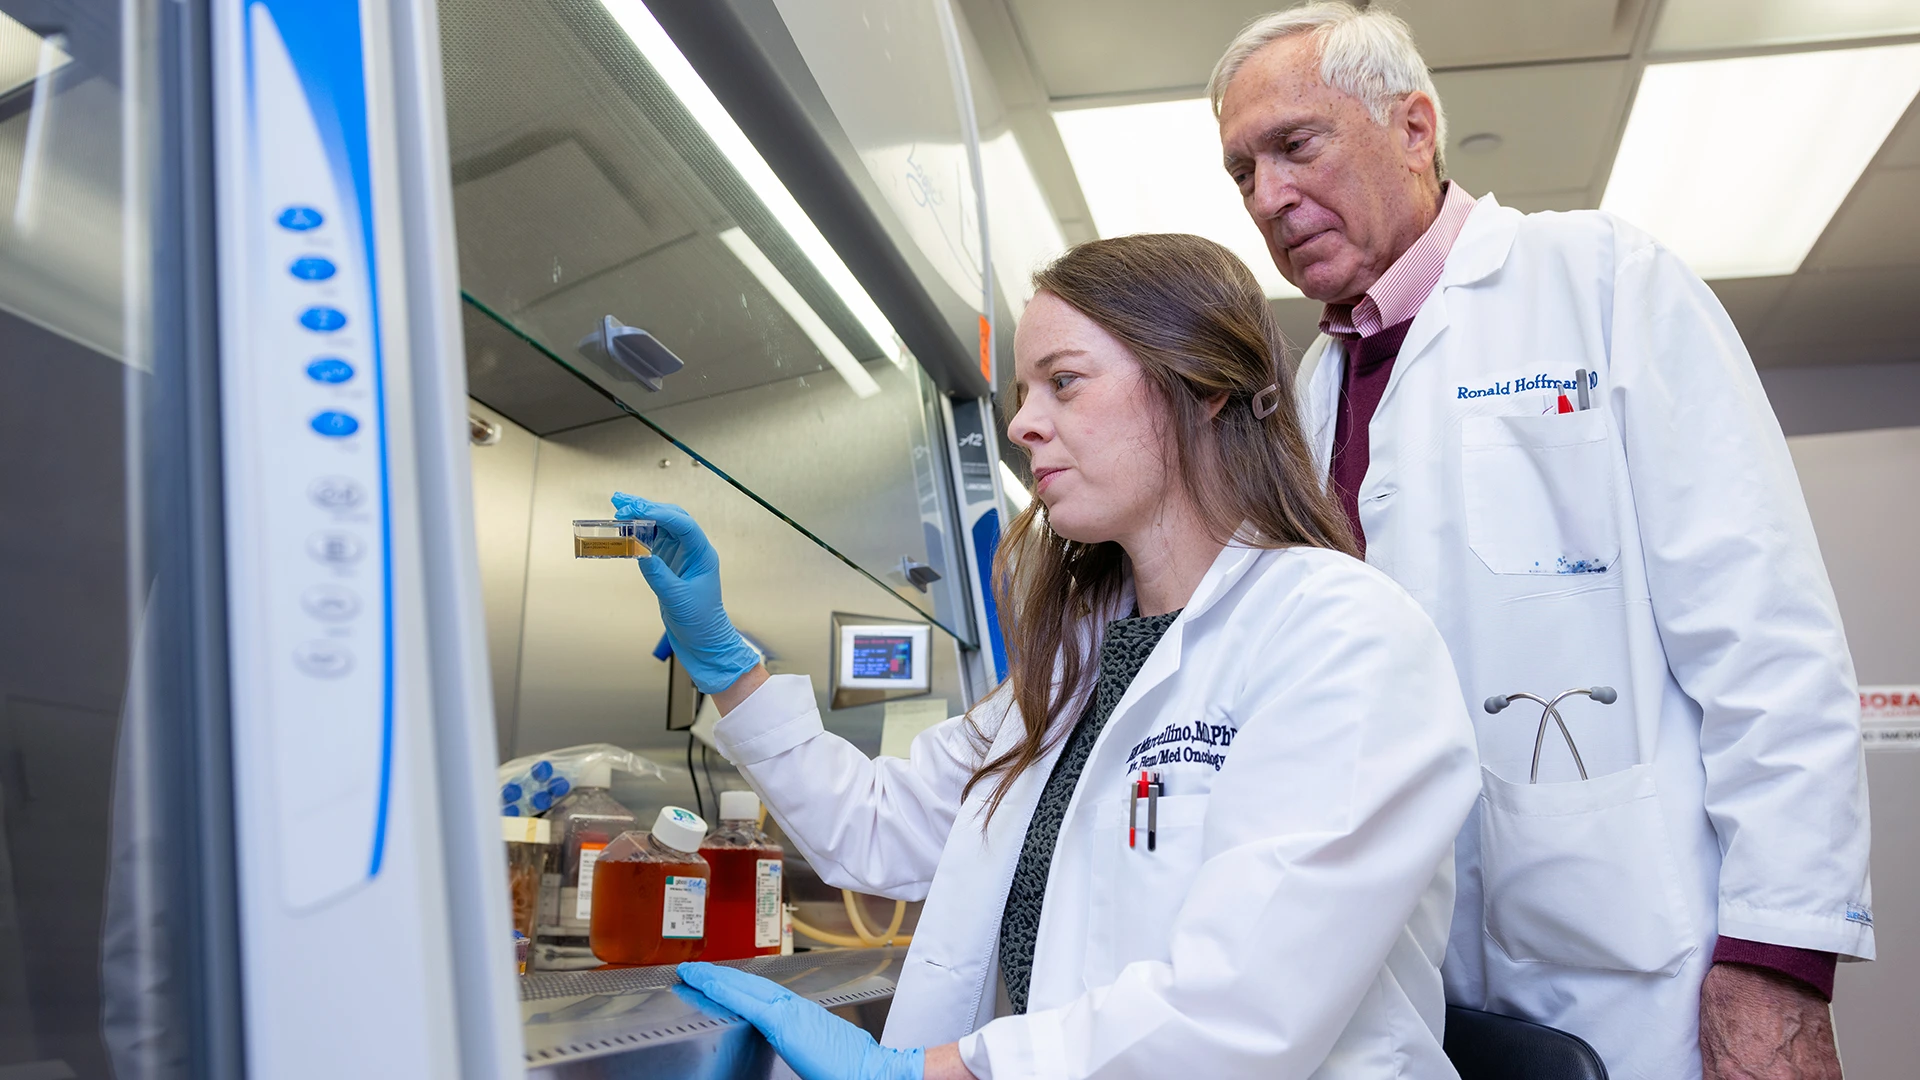 Dr. Hoffman's research spans multiple areas in hematological oncology, and as a result he (right) frequently collaborates with other specialists at Mount Sinai, including Bridget Marcellino, MD, PhD (left), who also conducts research in myeloproliferative neoplasms.